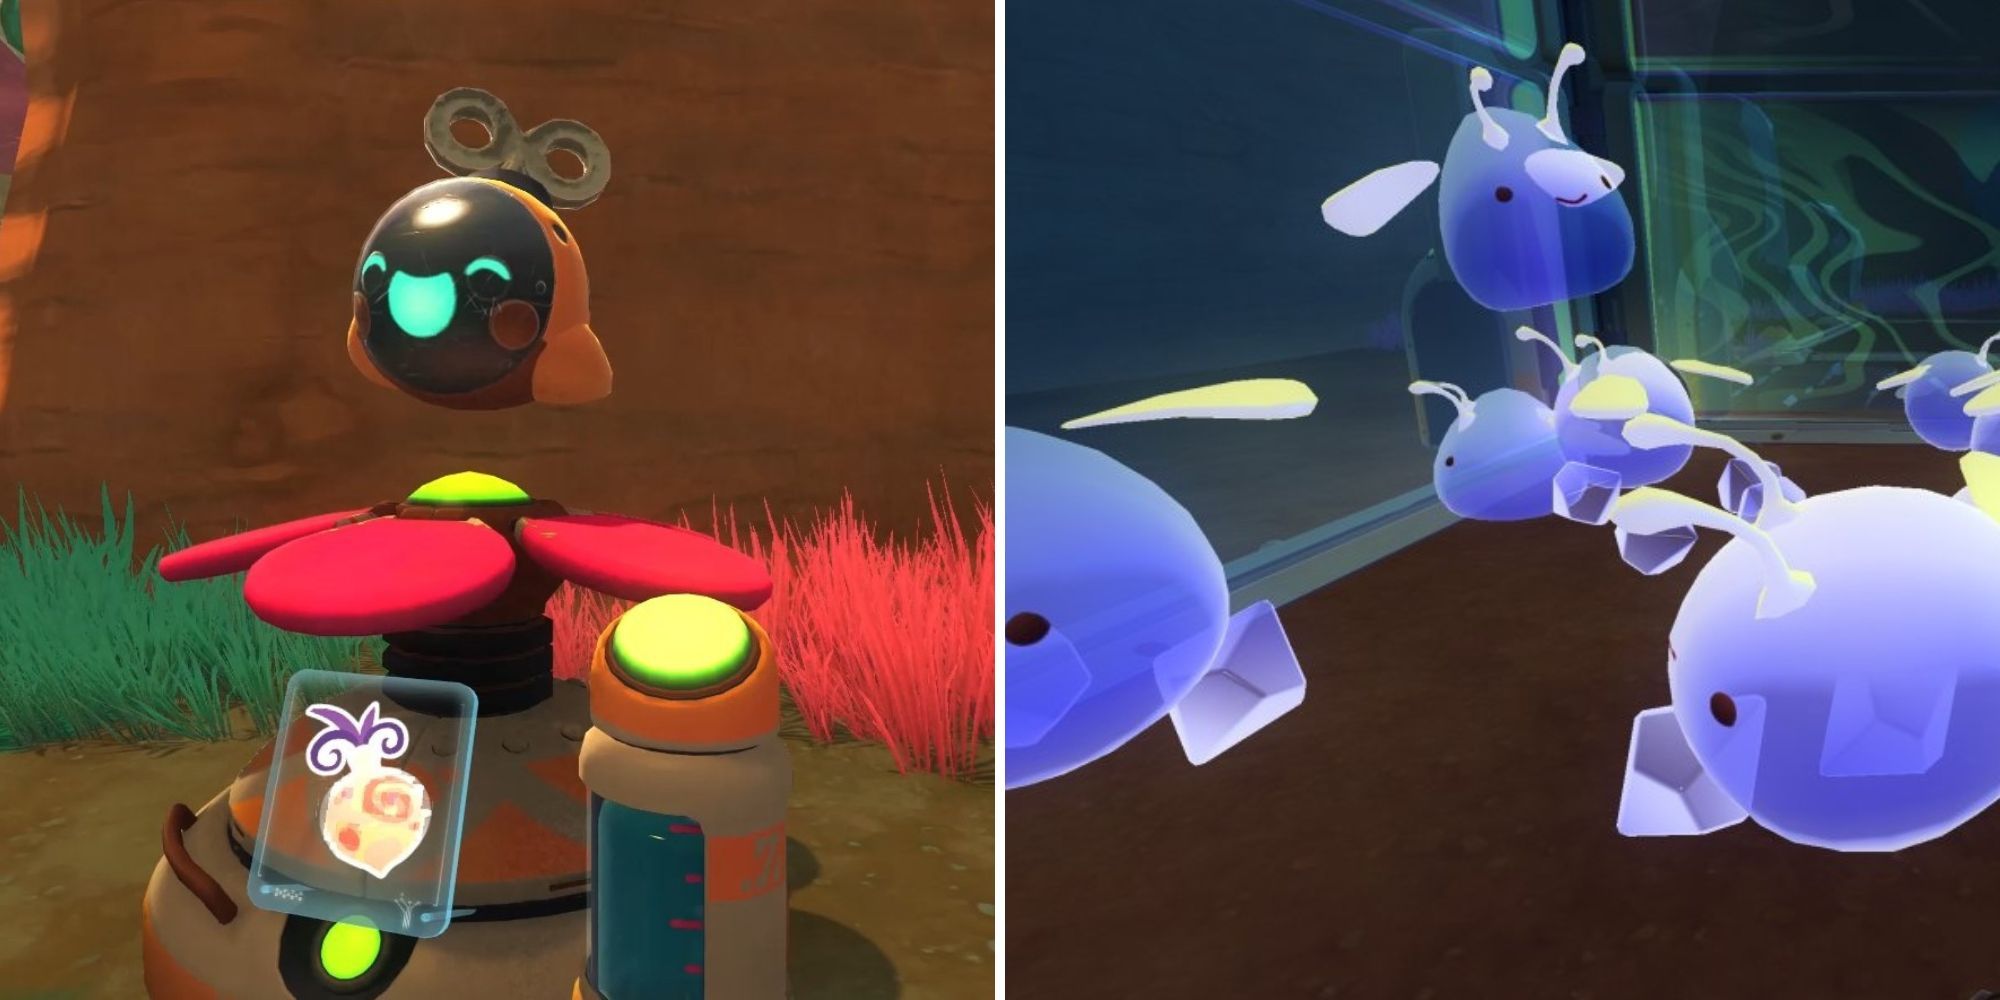 On the left is a picture of a  happy drone sitting on top of a flower and on the right is a corral of Phosphorus Slimes